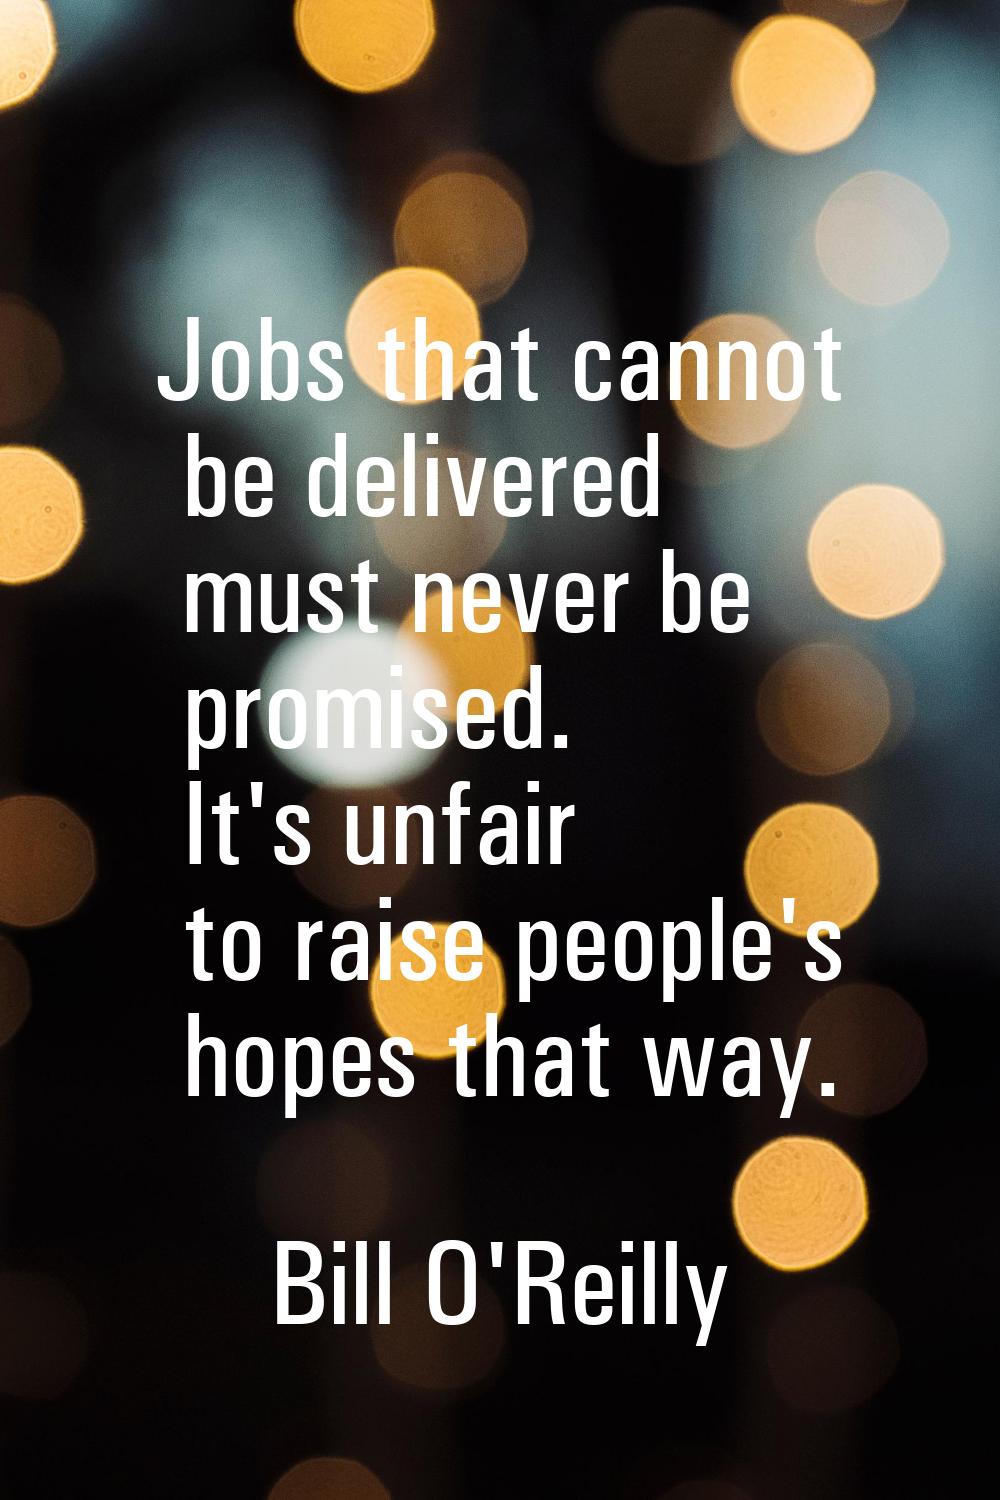 Jobs that cannot be delivered must never be promised. It's unfair to raise people's hopes that way.